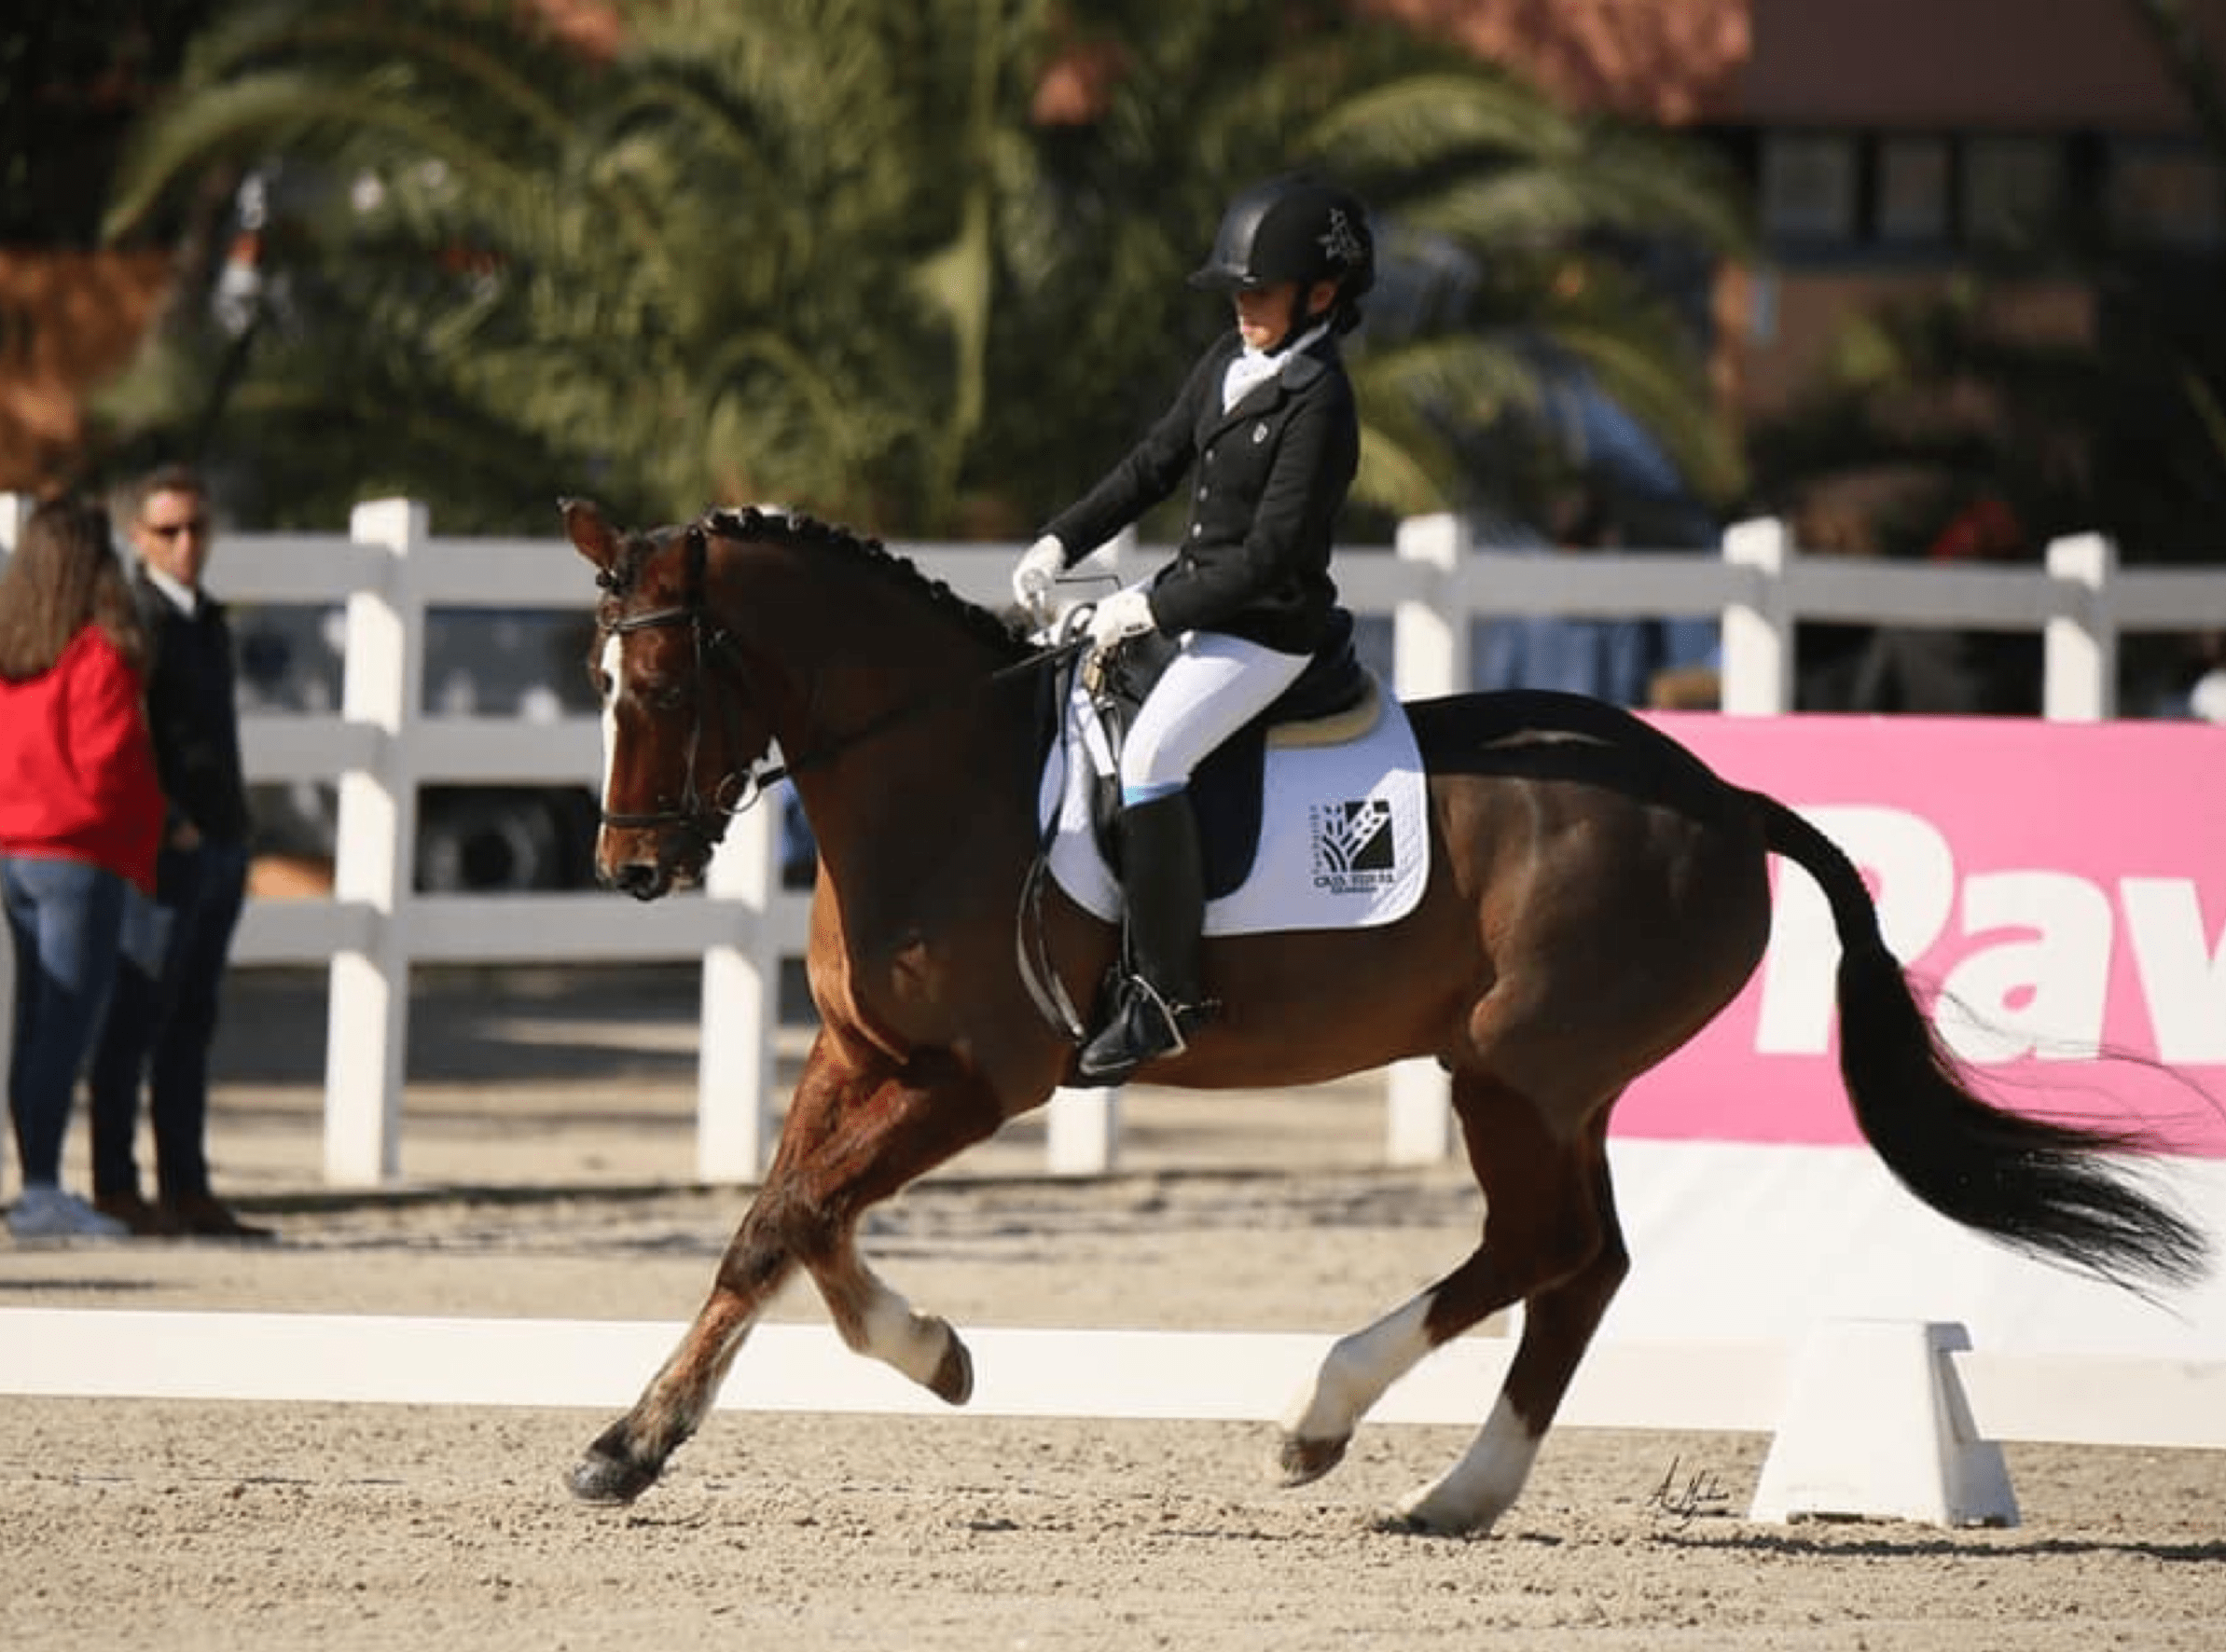 The image captures the elegance and precision of dressage in the refined setting of Sotogrande, exemplifying the sophisticated equestrian experiences available within this prestigious real estate community.